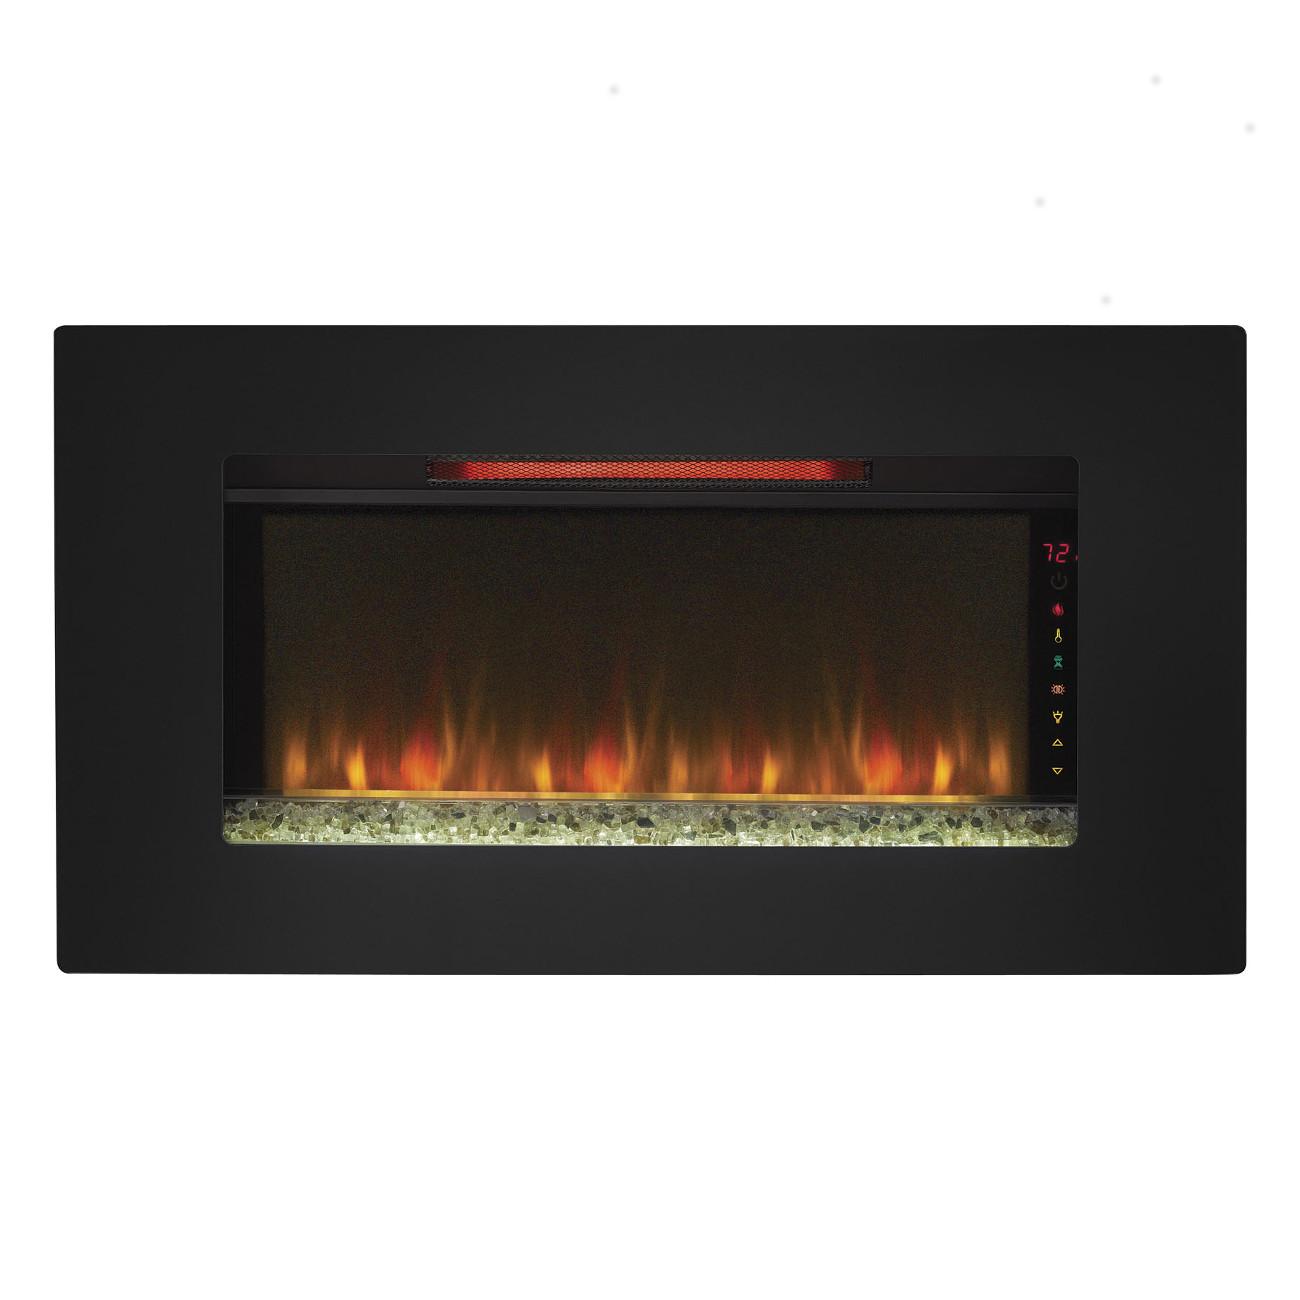 Classic Flame Electric Fireplace Insert
 Classic Flame "Elysium" Infrared Electric Fireplace Wall